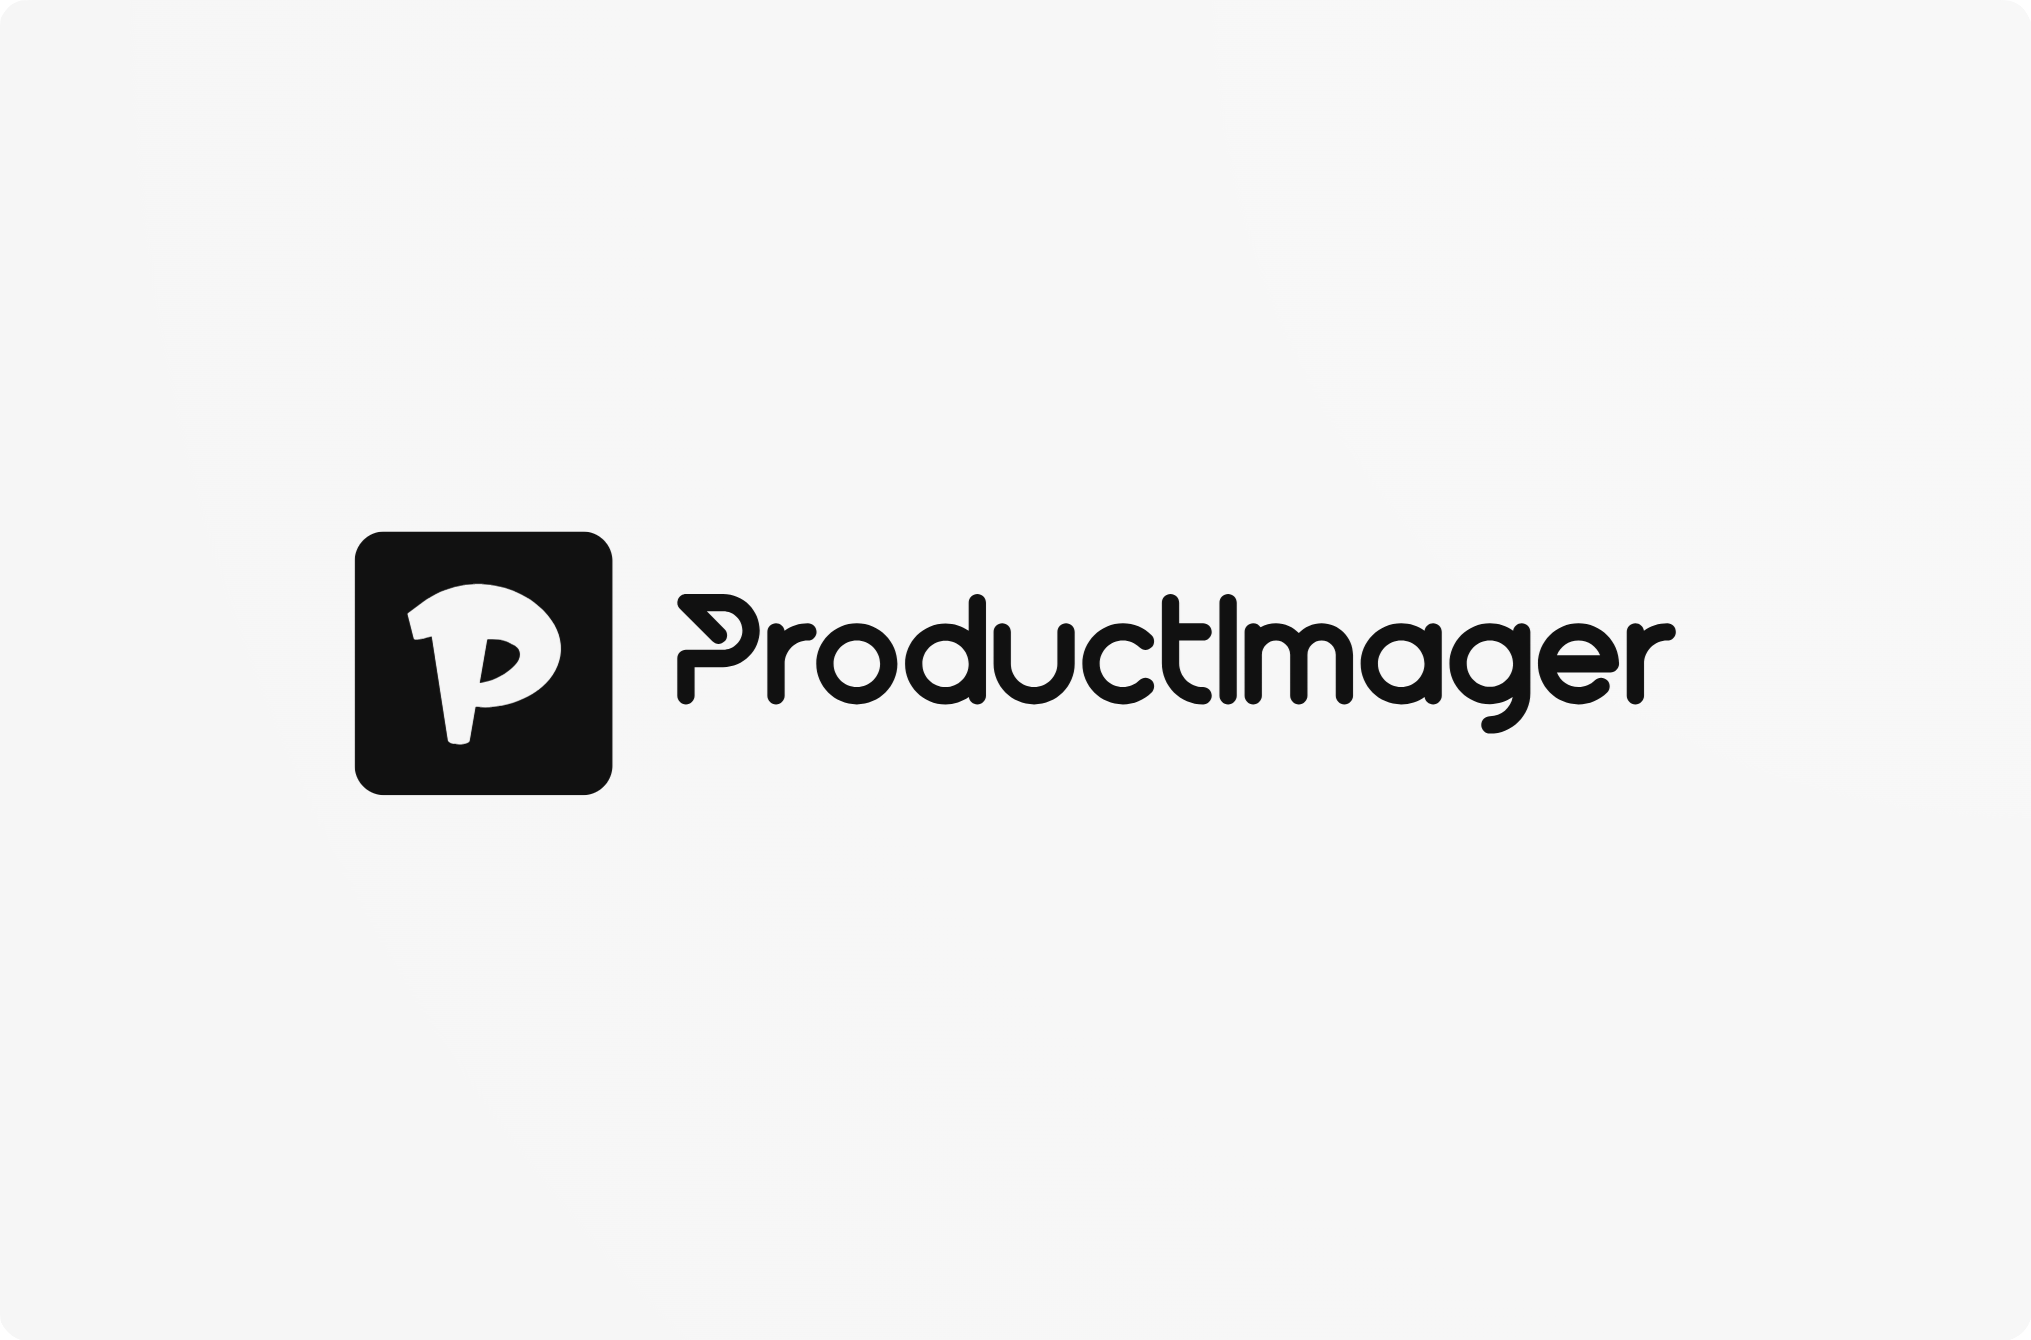 ProductImager logo